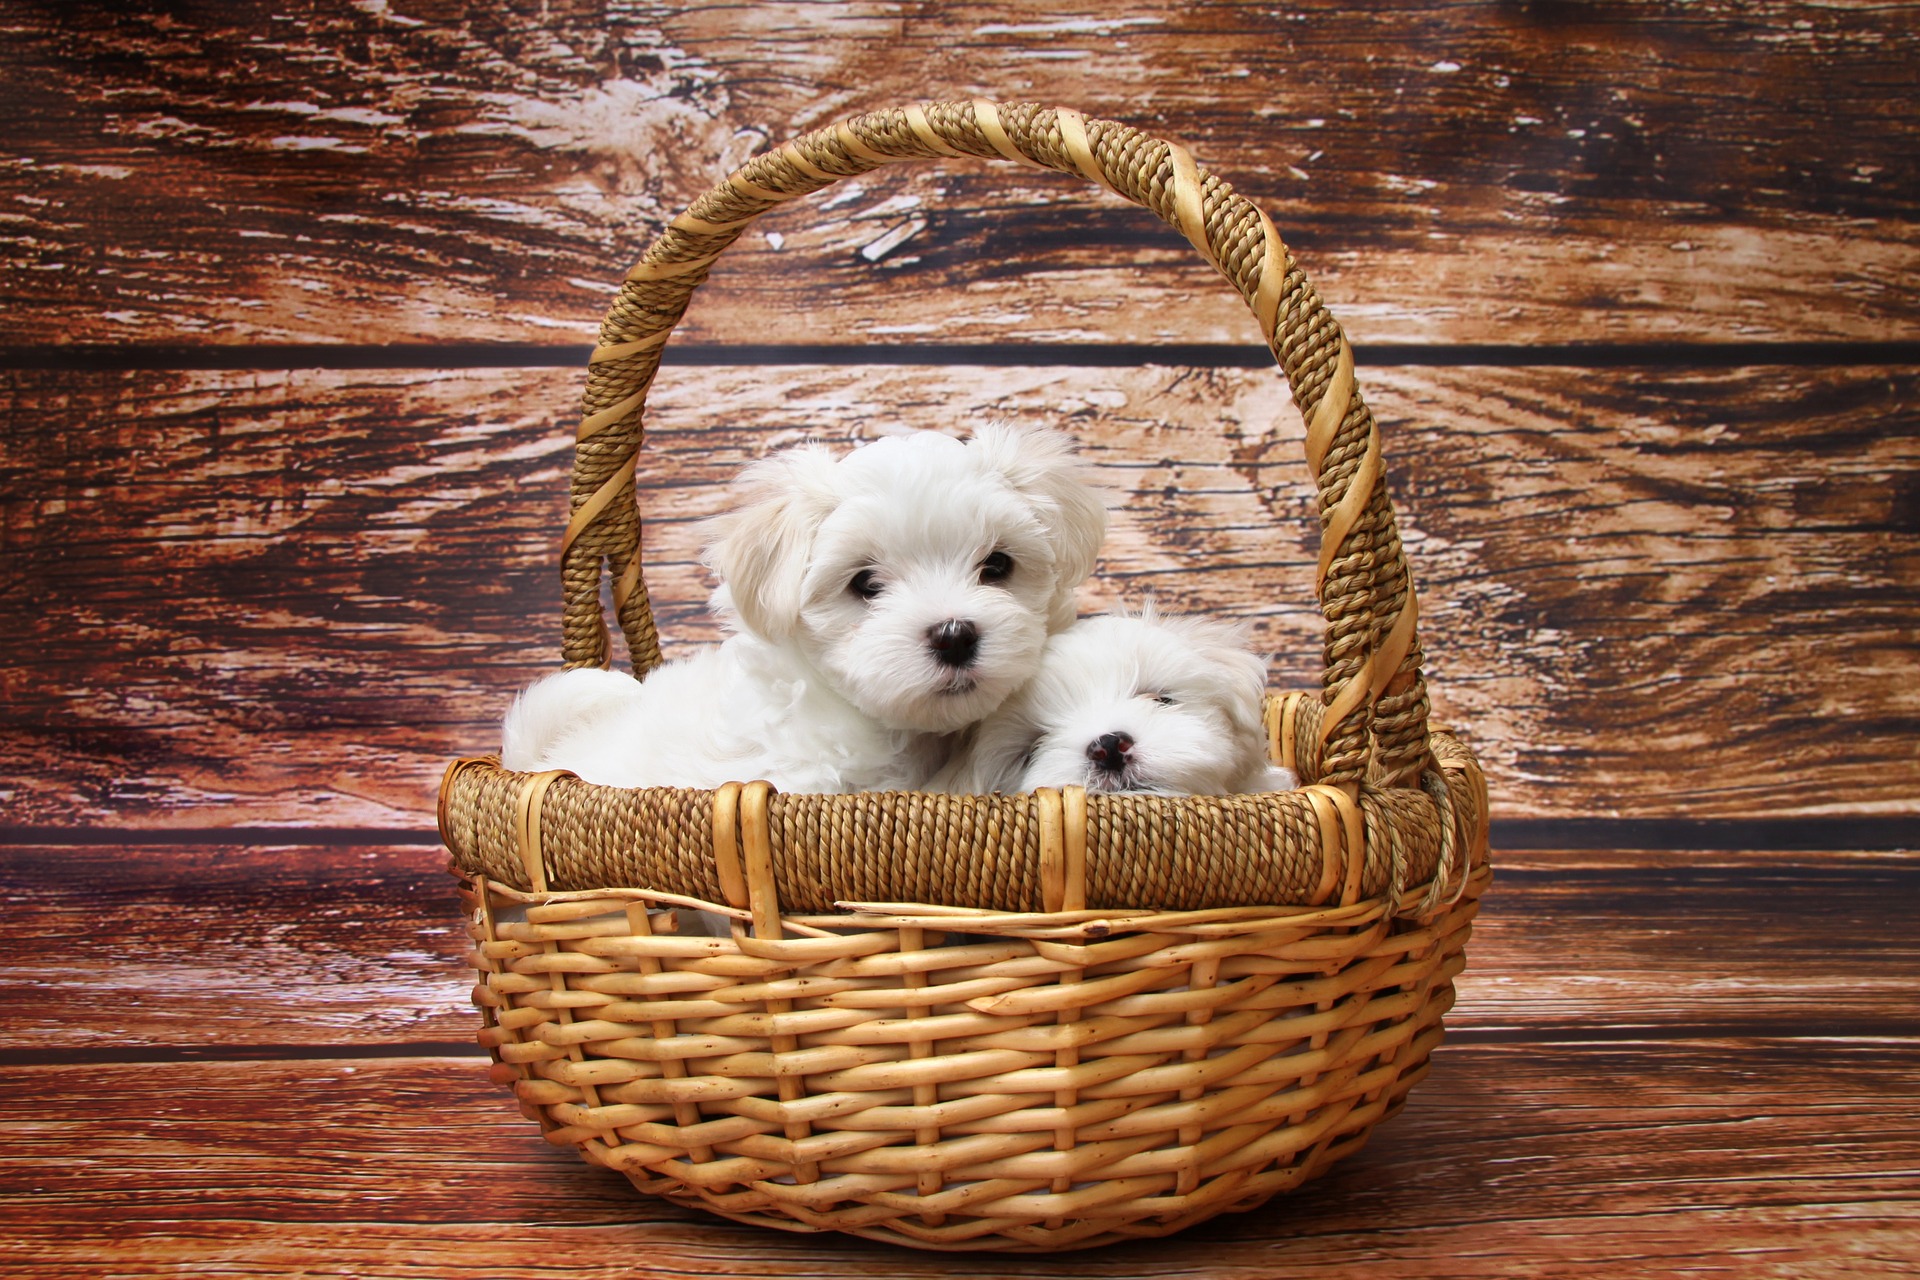 best toys for maltese puppies